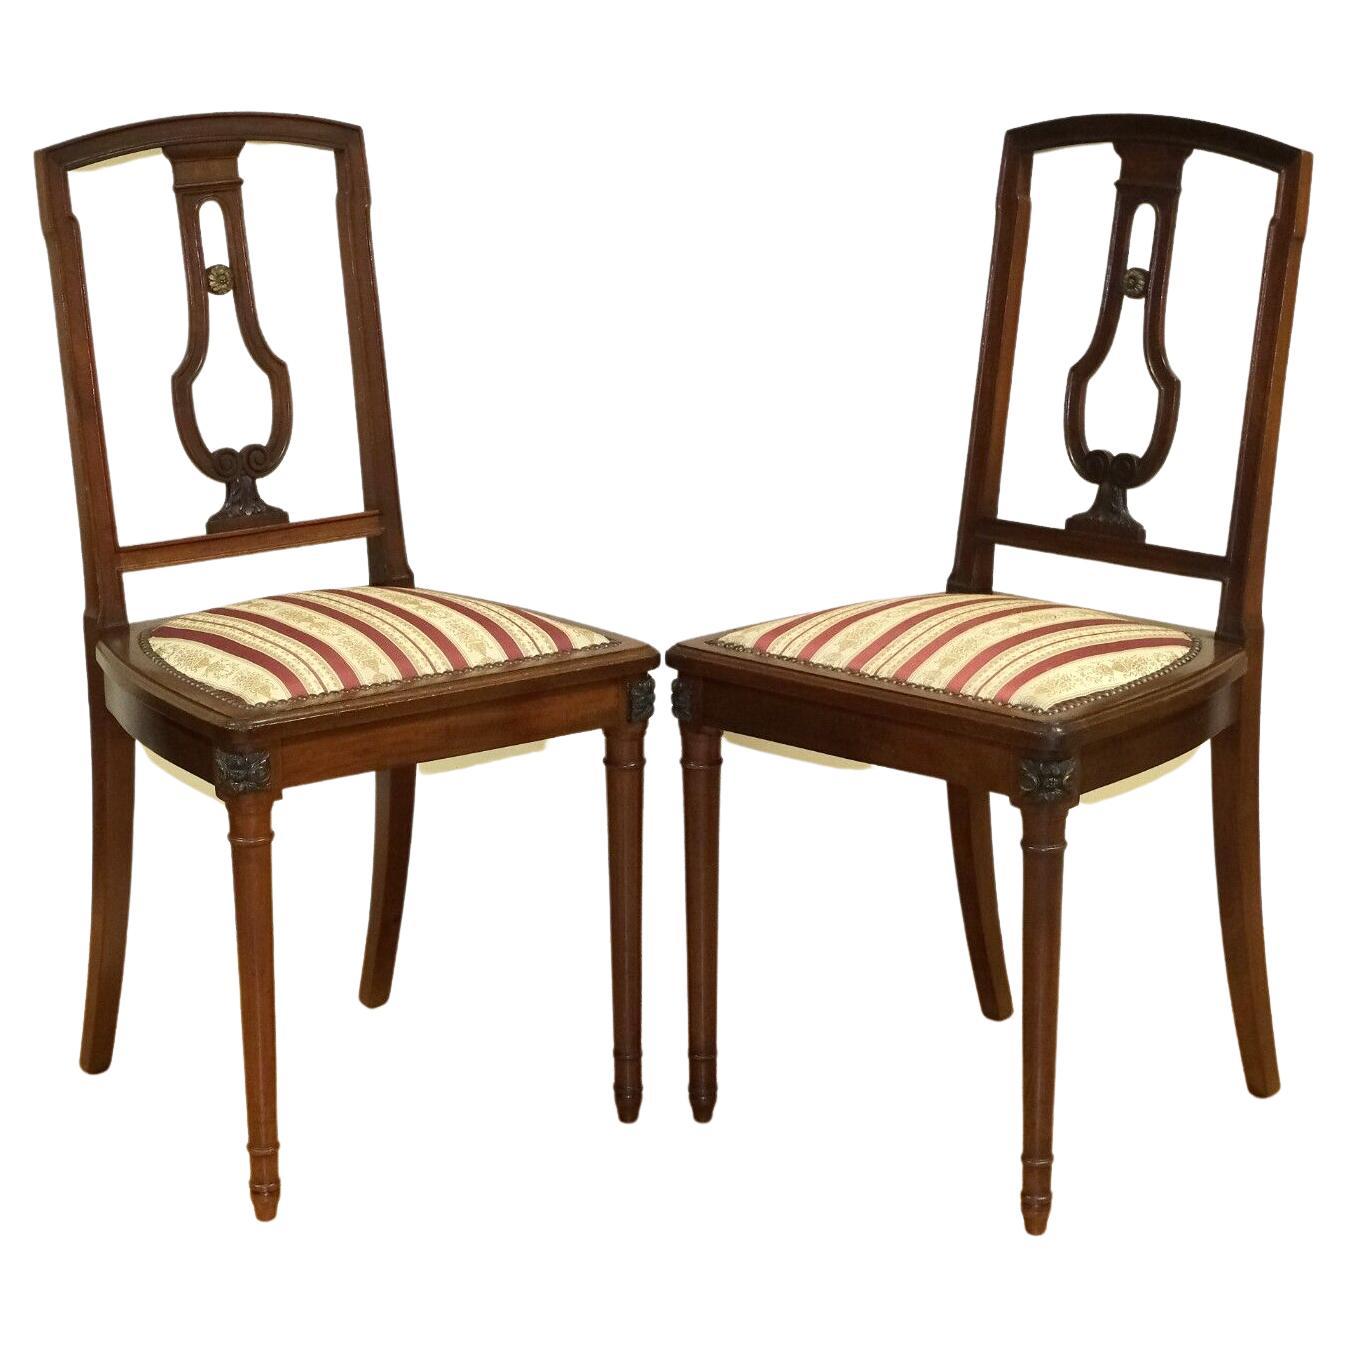 CHARMING PAIR OF OCCASIONAL HARDWOOD CHAIR WiTH STIPE FABRIC SEAT & STUDS For Sale